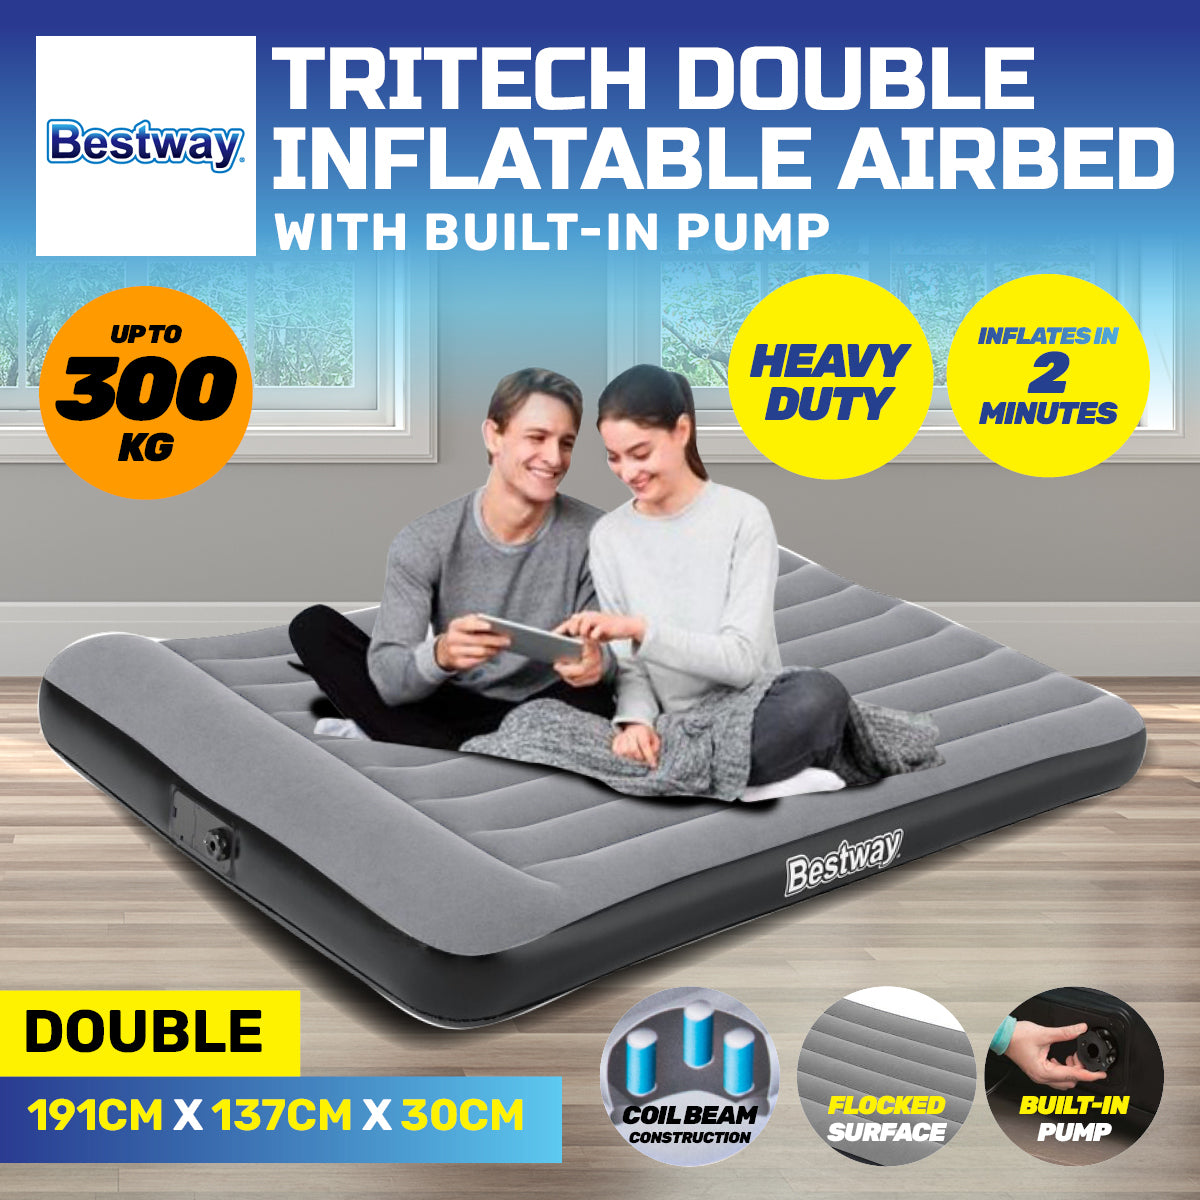 Bestway Double Inflatable Air Bed Tritech Built-In Pump Heavy Duty - SILBERSHELL